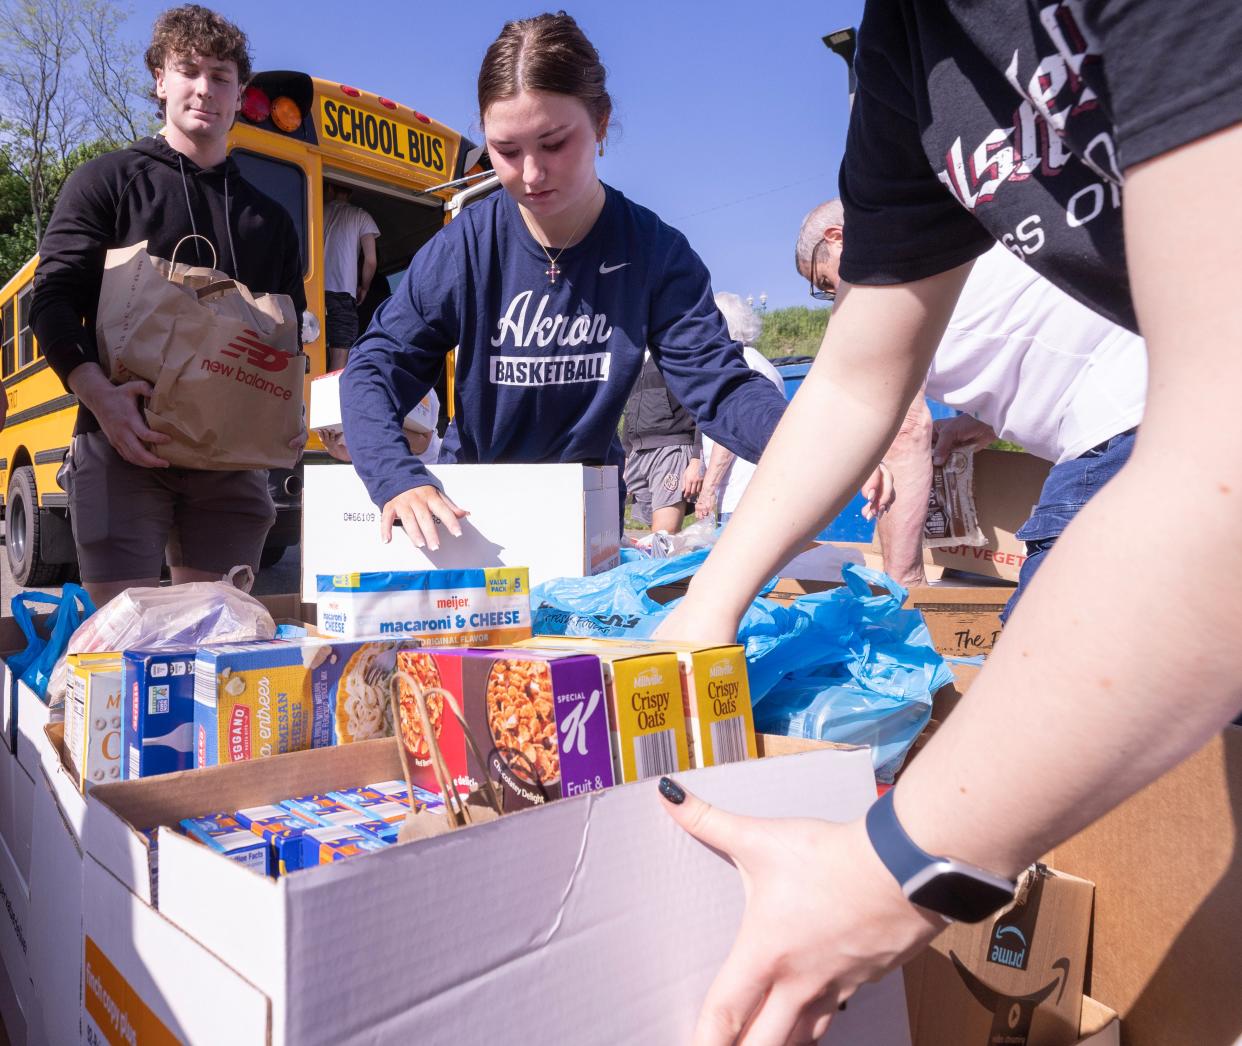 Walsh Jesuit High School seniors Grace Haines, center, and Noah Brock, left, help unload a Jackson Local school bus at the Akron-Canton Regional Foodbank's Stark County campus Tuesday in Canton. Volunteers helped unload food as part of the seventh annual "Hunger: The Bus Stops Here" fundraising drive.